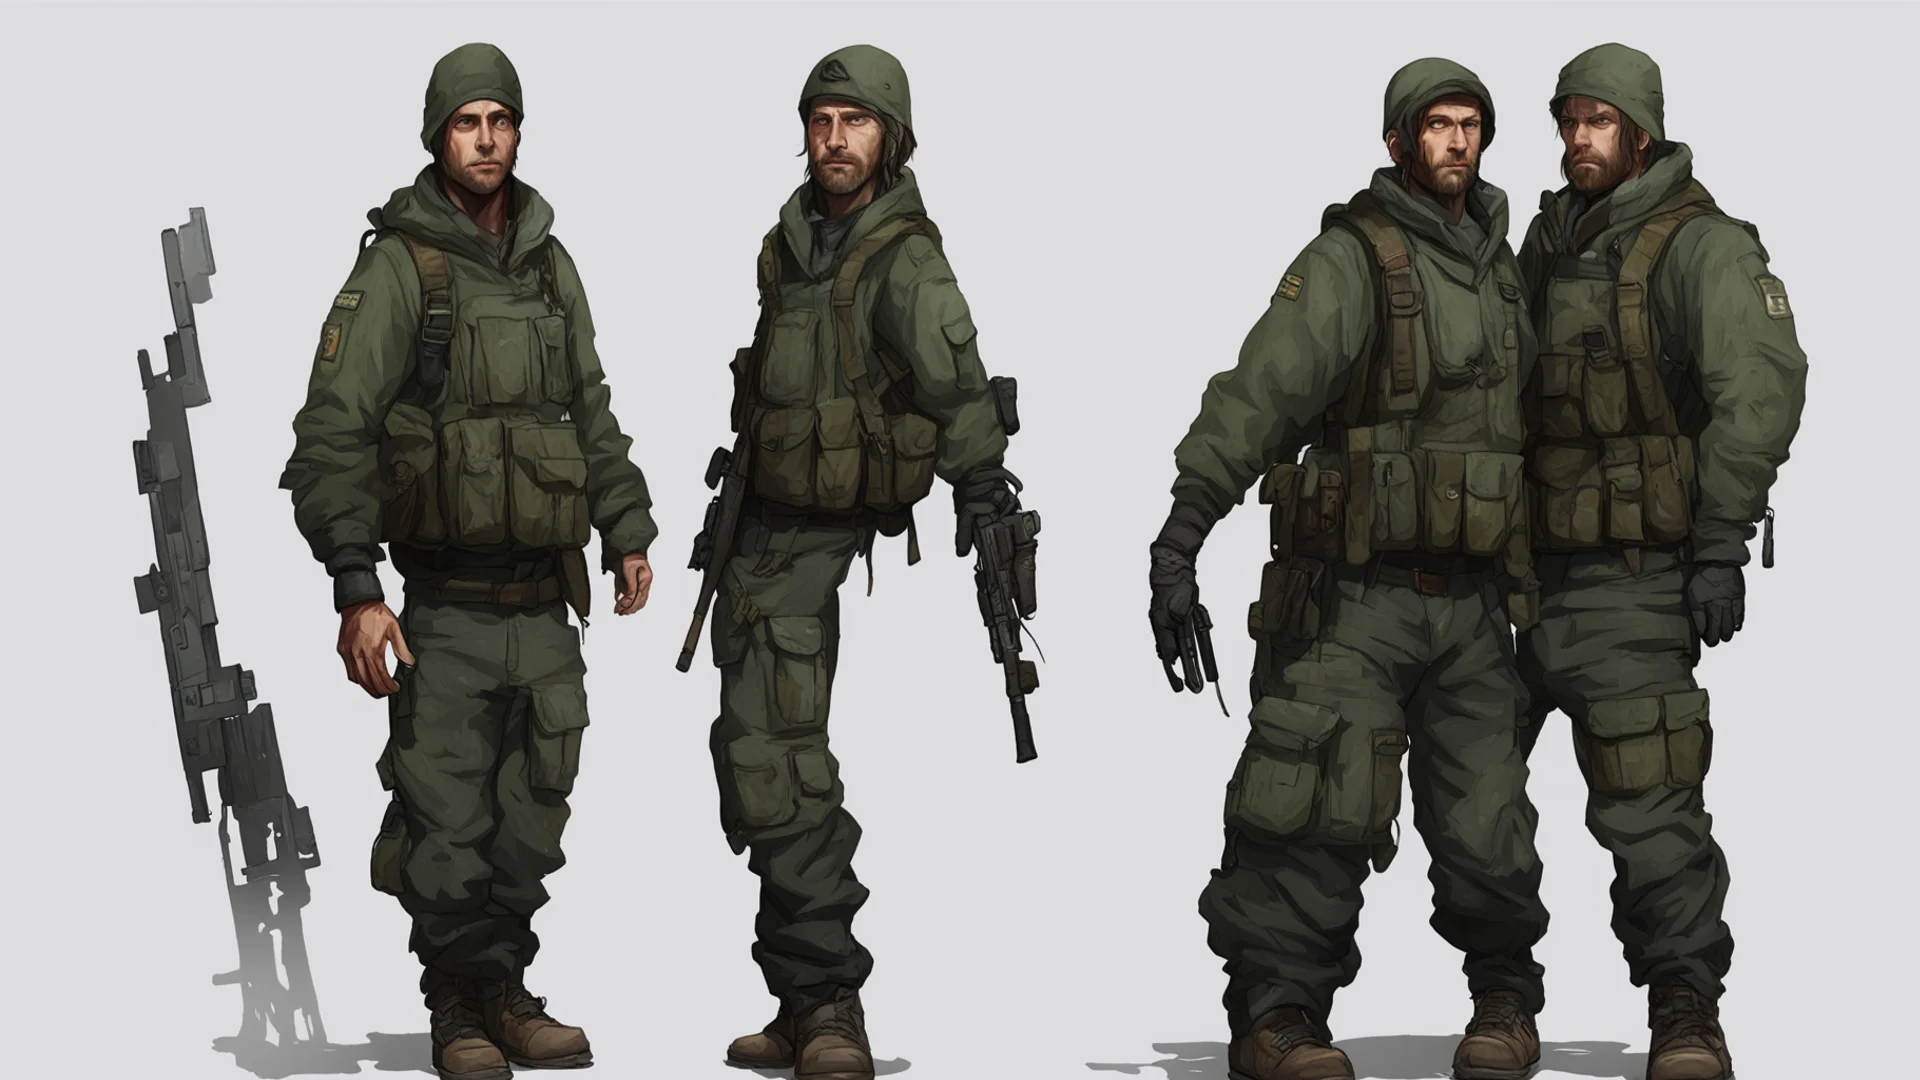 a game character concept art inspired by survival games like dayz  amazing awesome portrait 2 wide